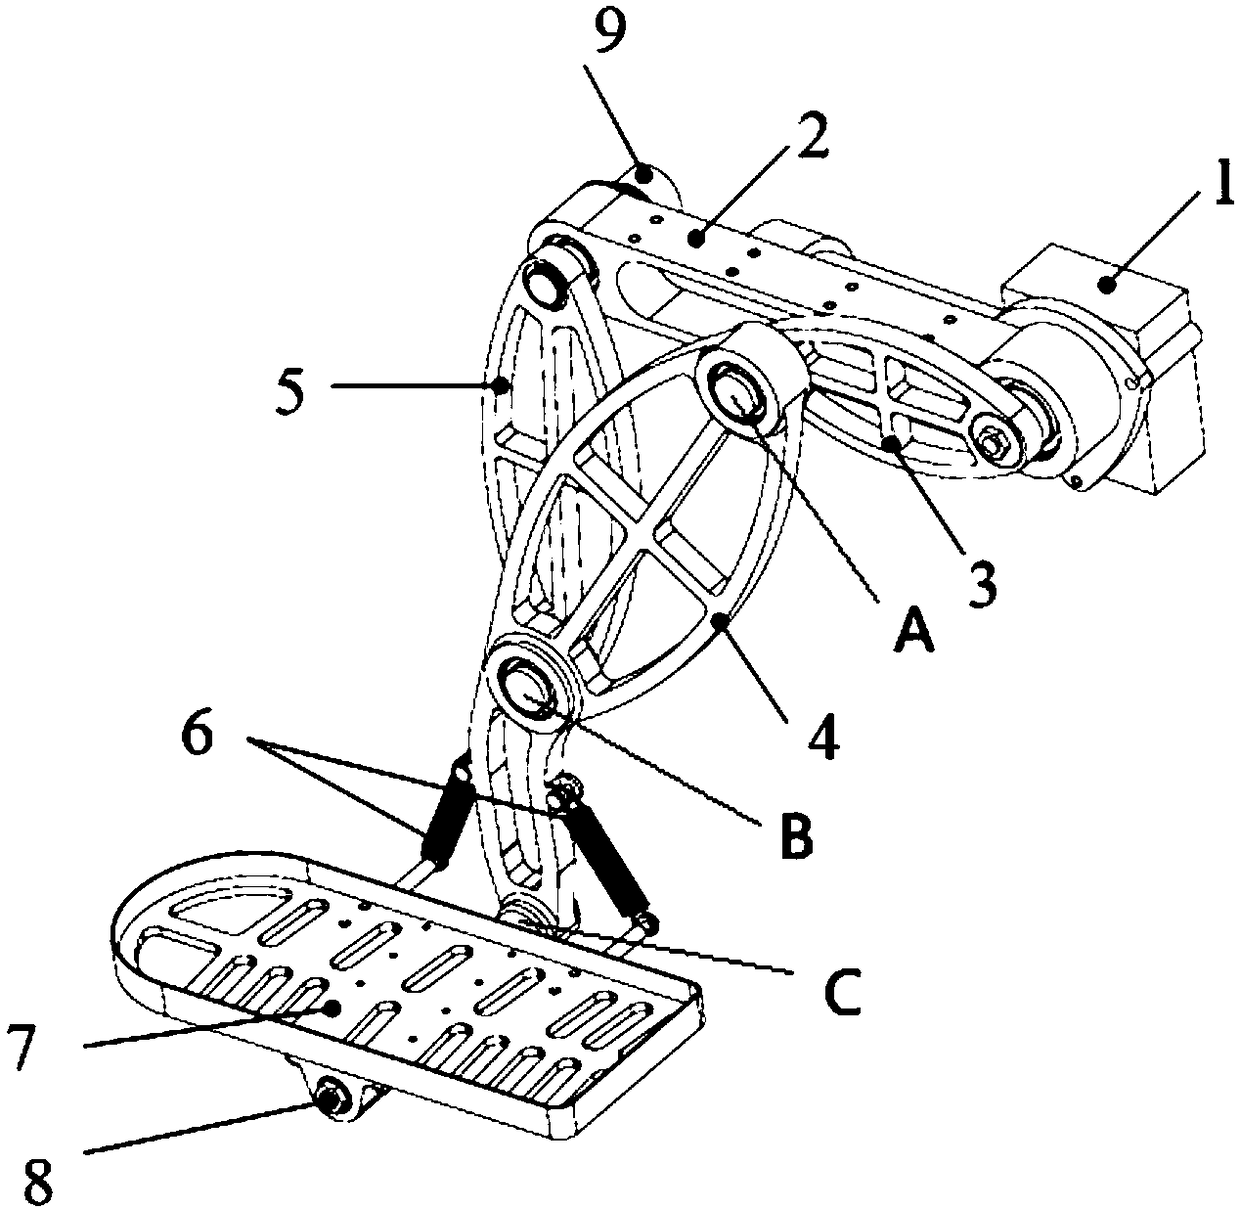 Four-connecting-rod power-assisted walking mechanism